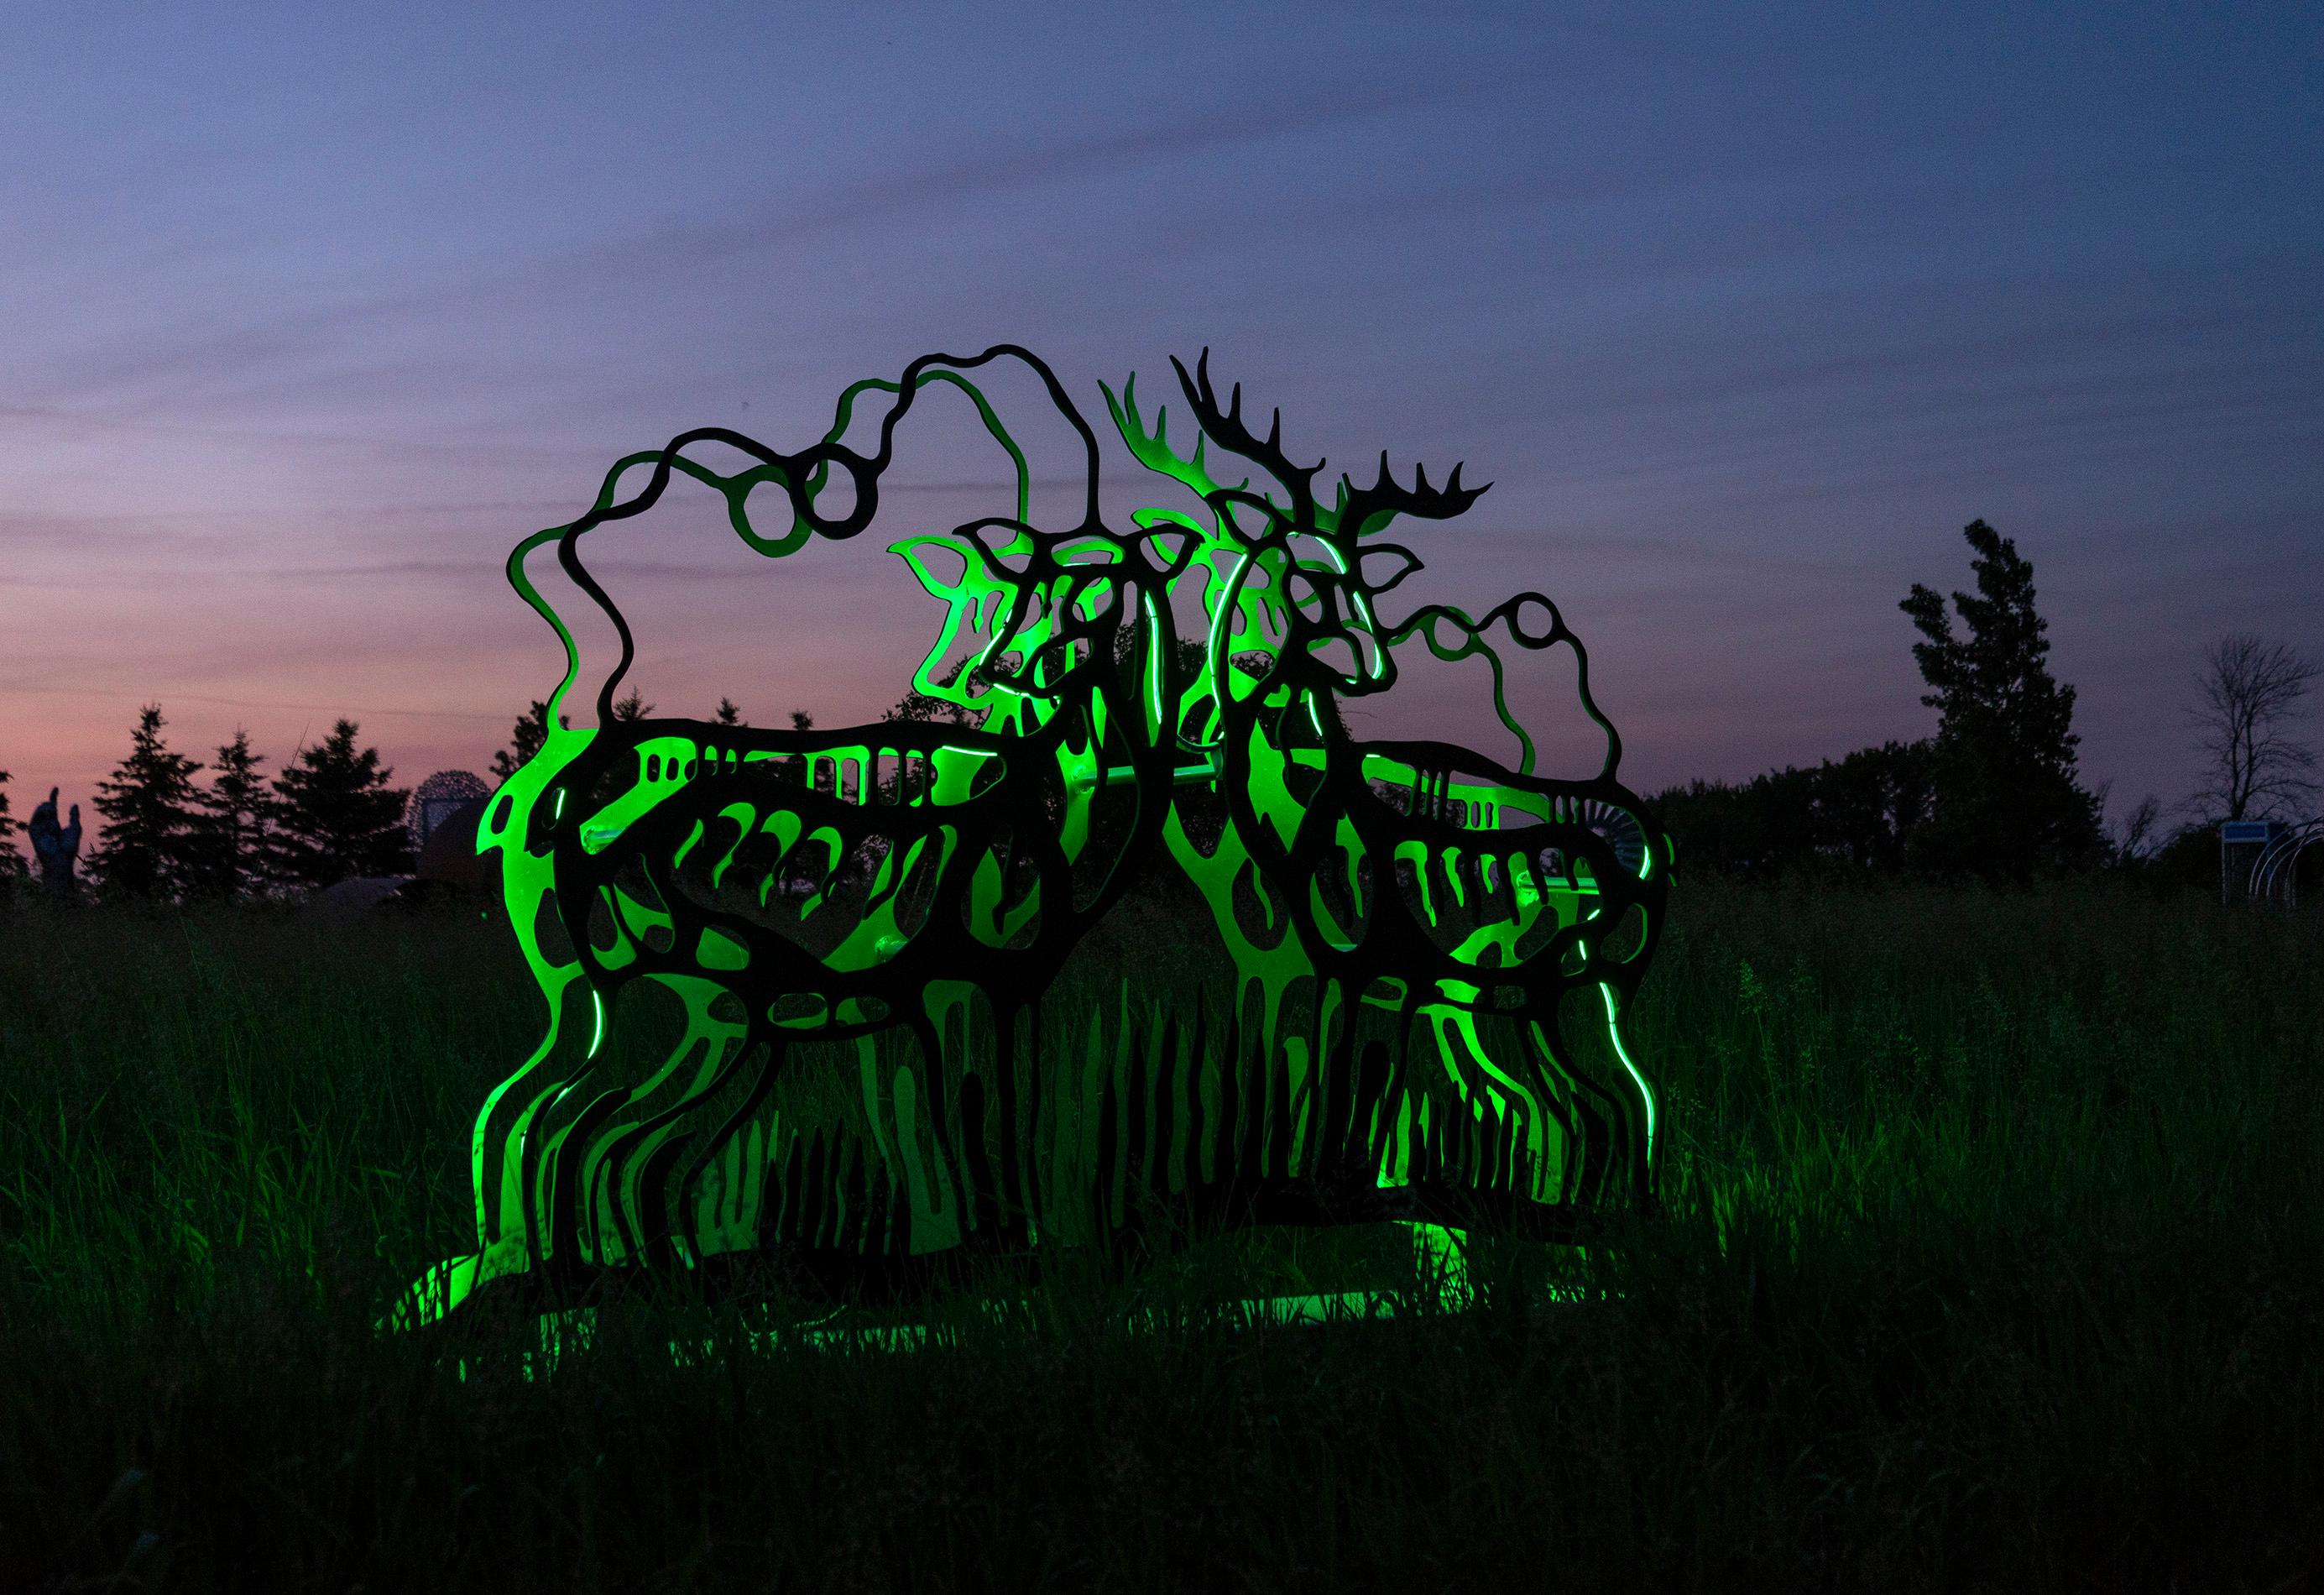 The majesty of woodland animals is celebrated in these striking metal sculptures by the Six Nations Mohawk artist Adam Monture. Monture’s beautiful paintings of woodland animals—deer, bears, wolves, turtles, loons and herons were re-imagined as